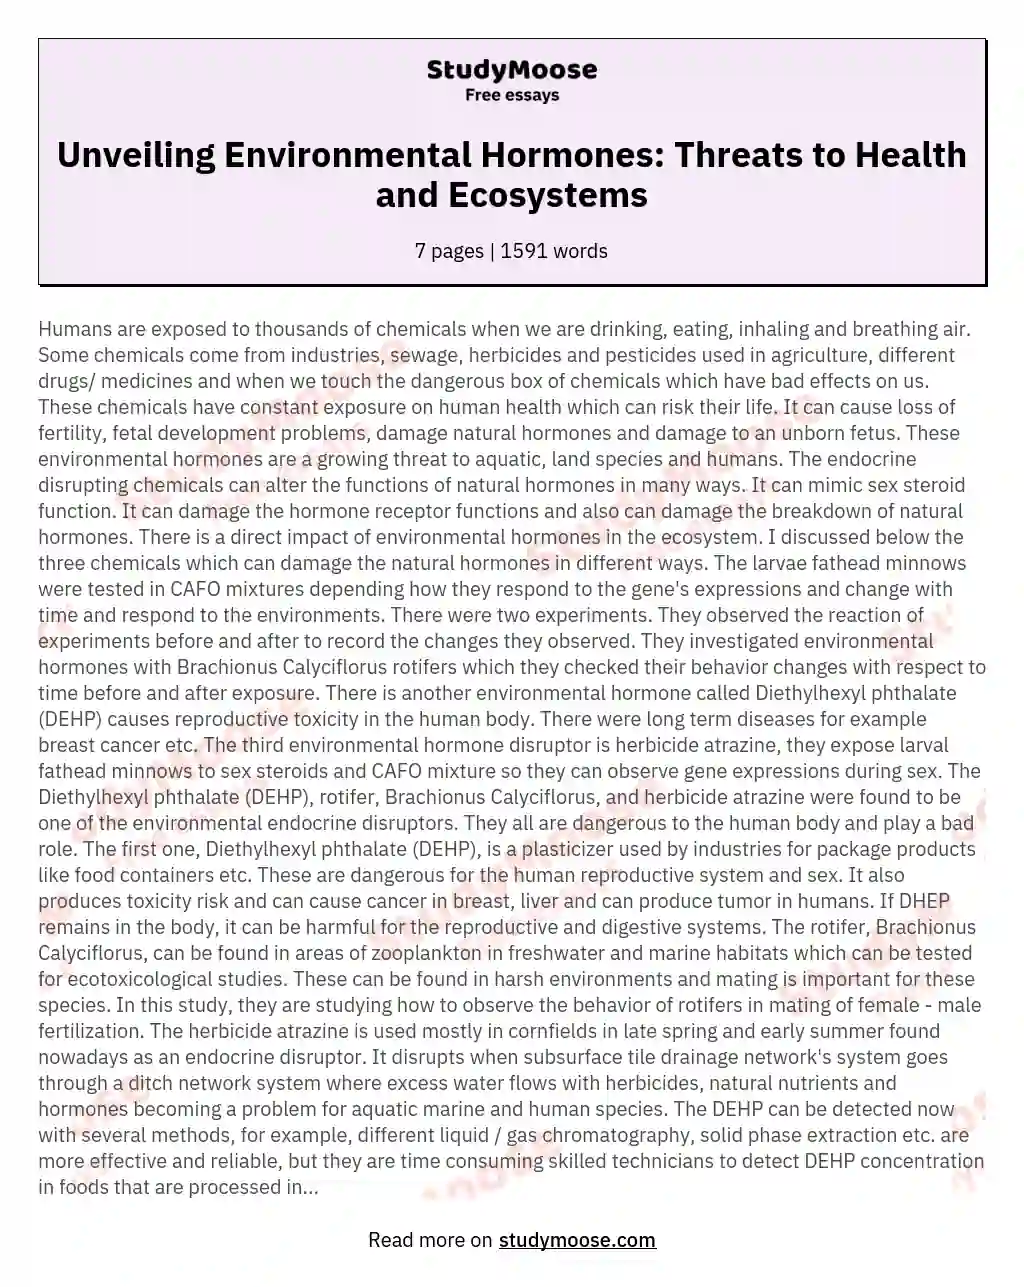 Unveiling Environmental Hormones: Threats to Health and Ecosystems essay